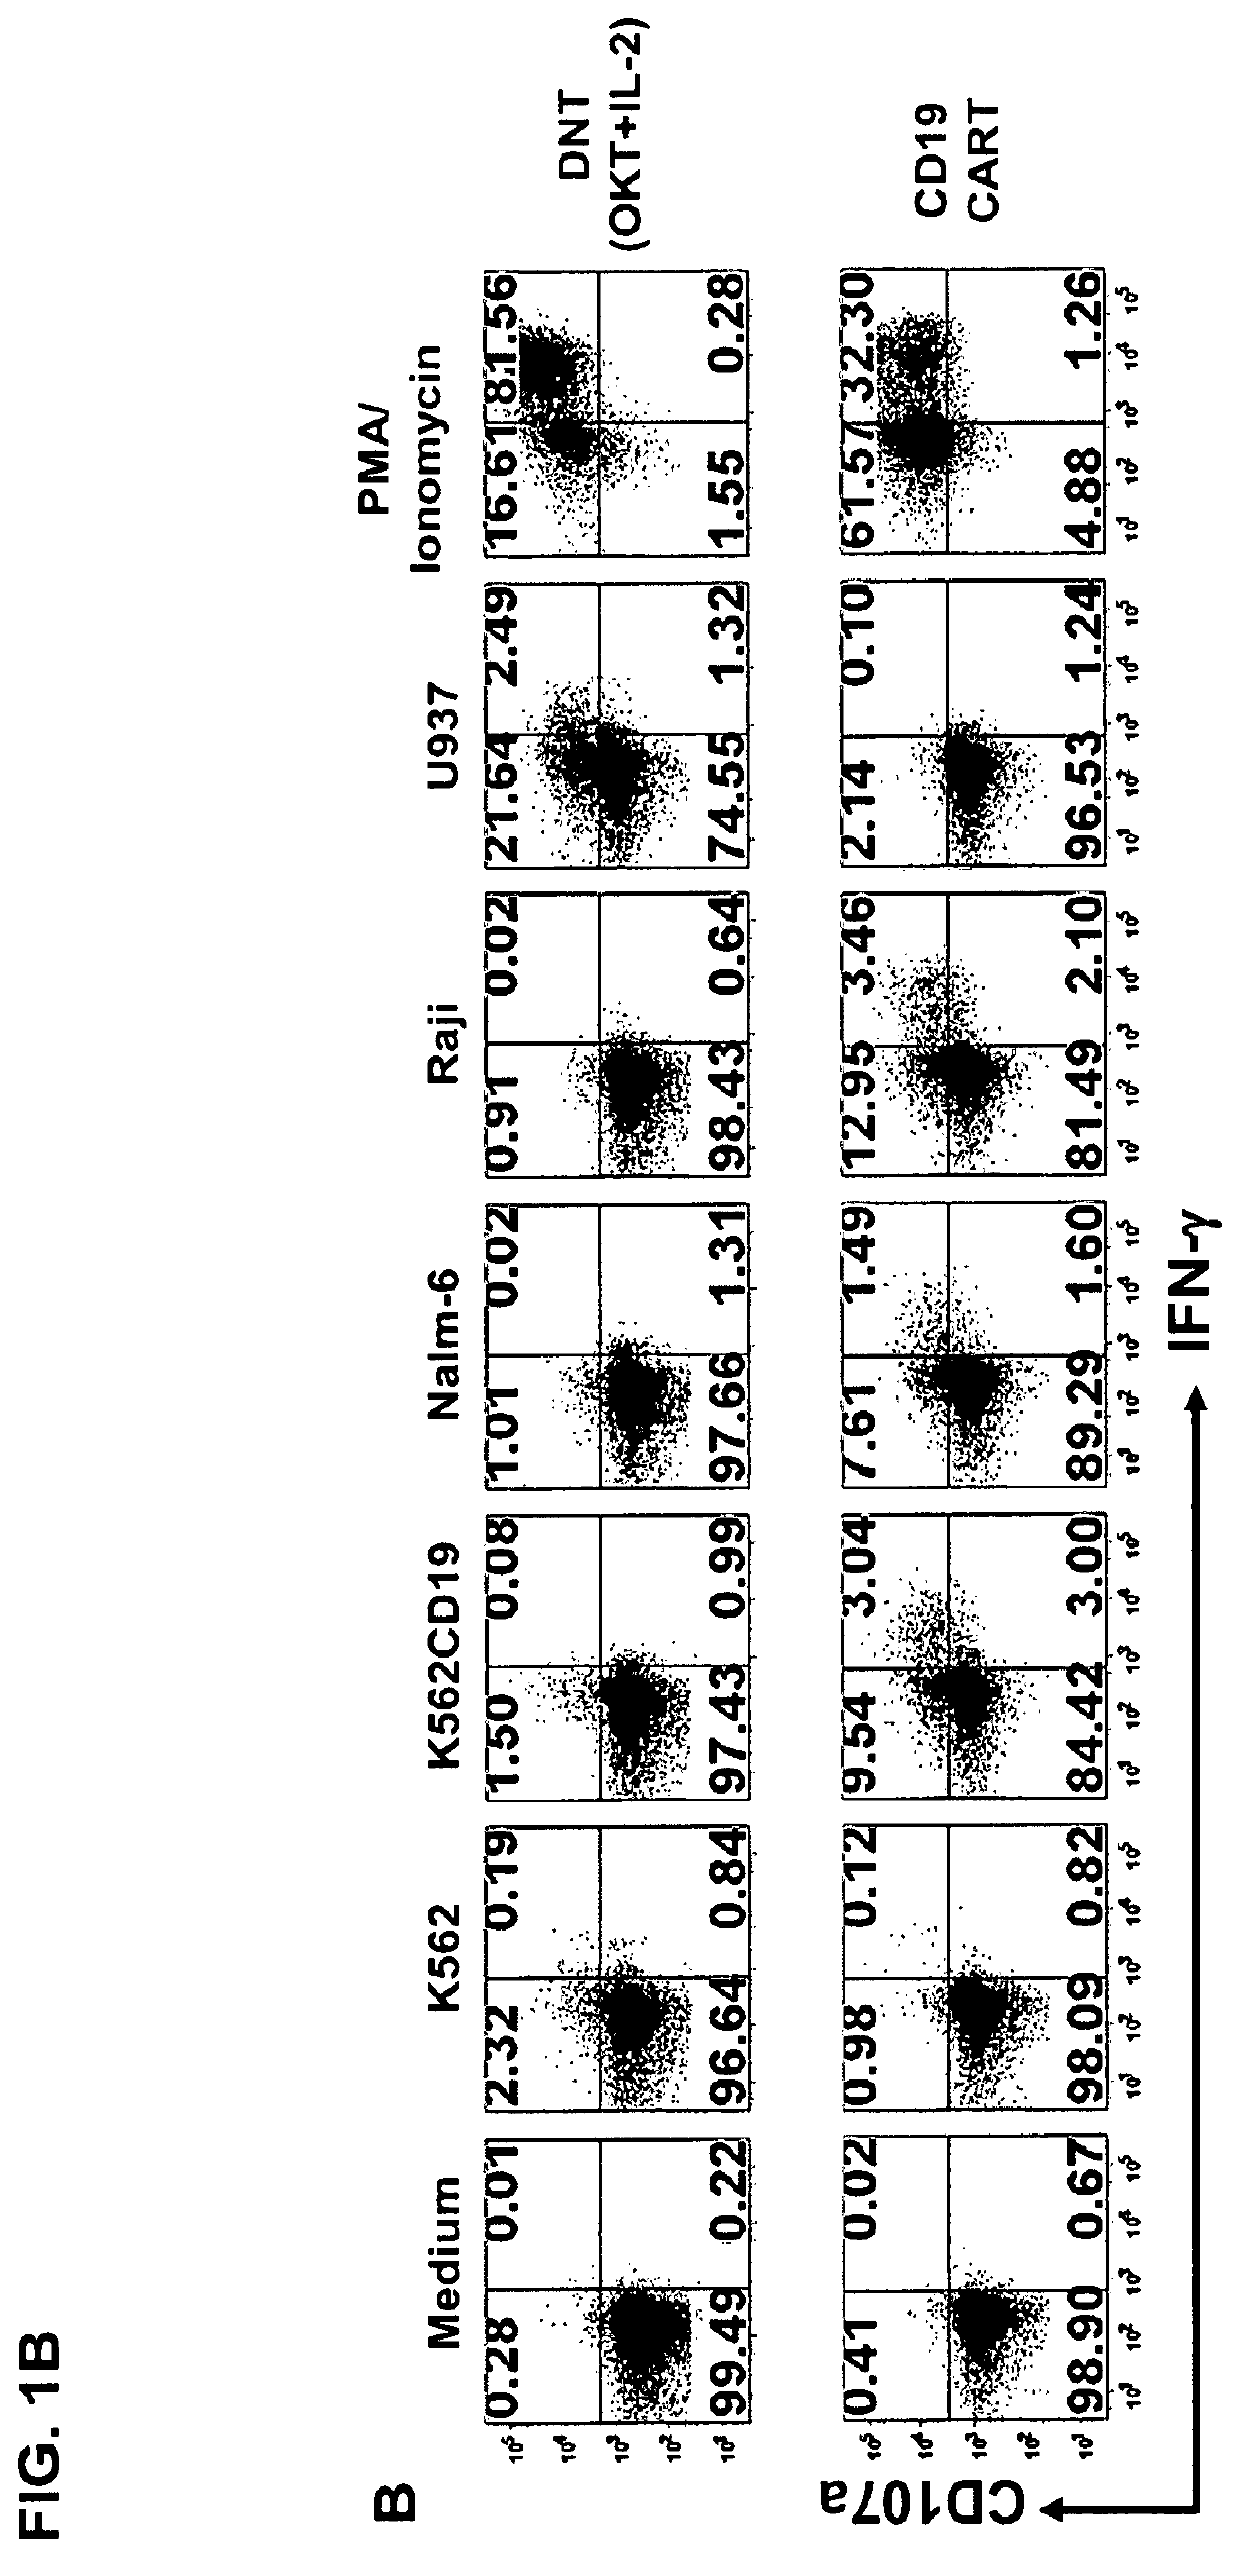 Type iii nkt cells and related compositions and methods